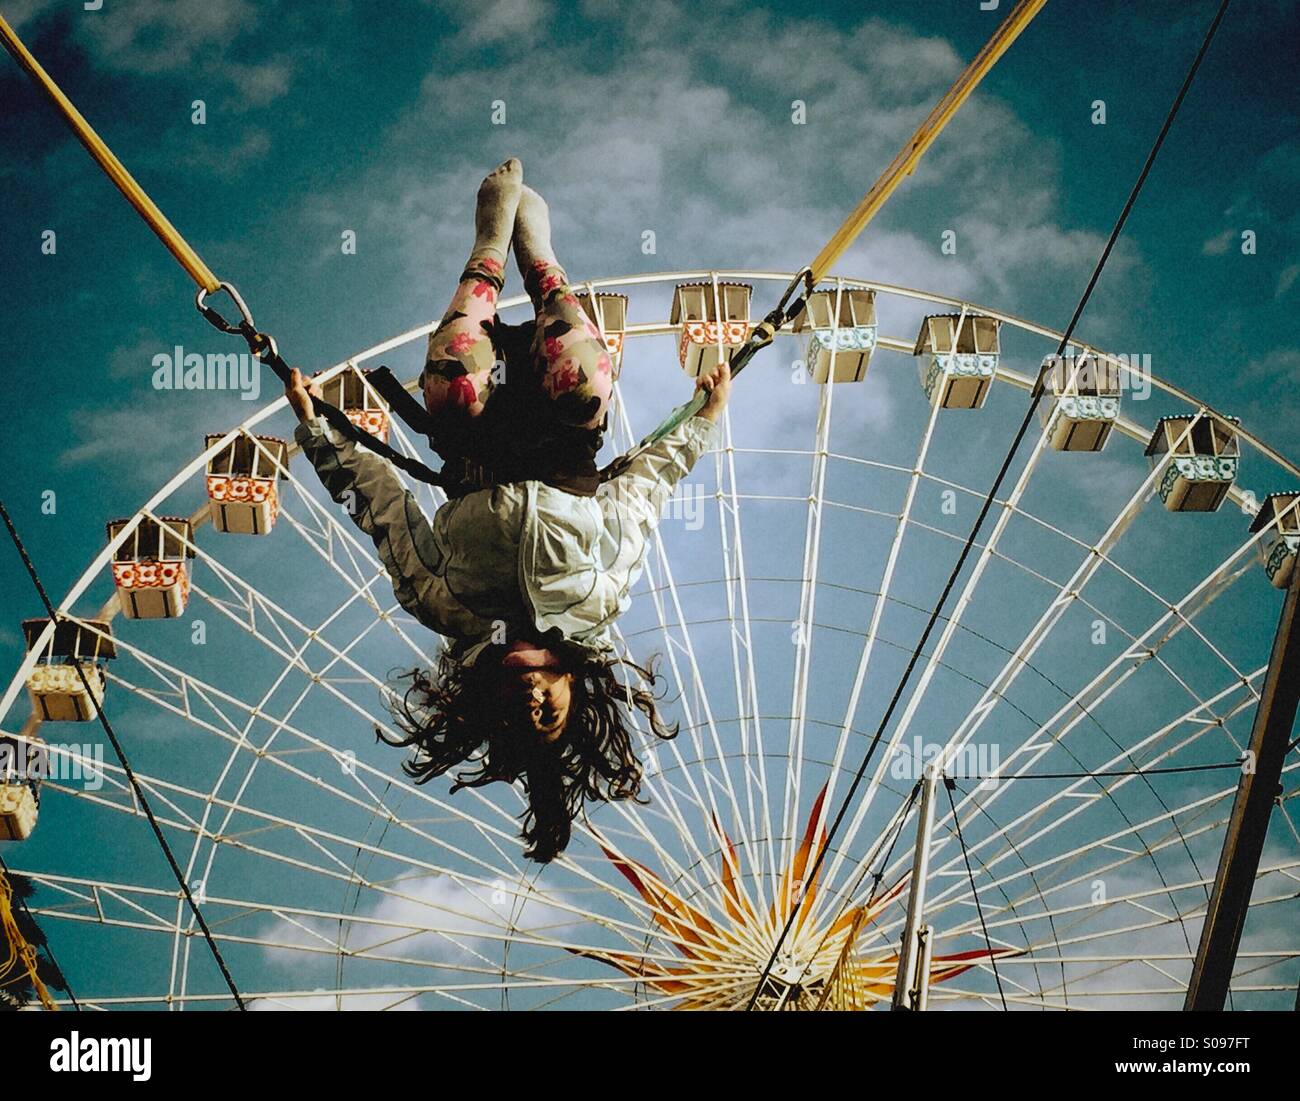 Young girl acrobat on a bungee cord at an amusement park Stock Photo